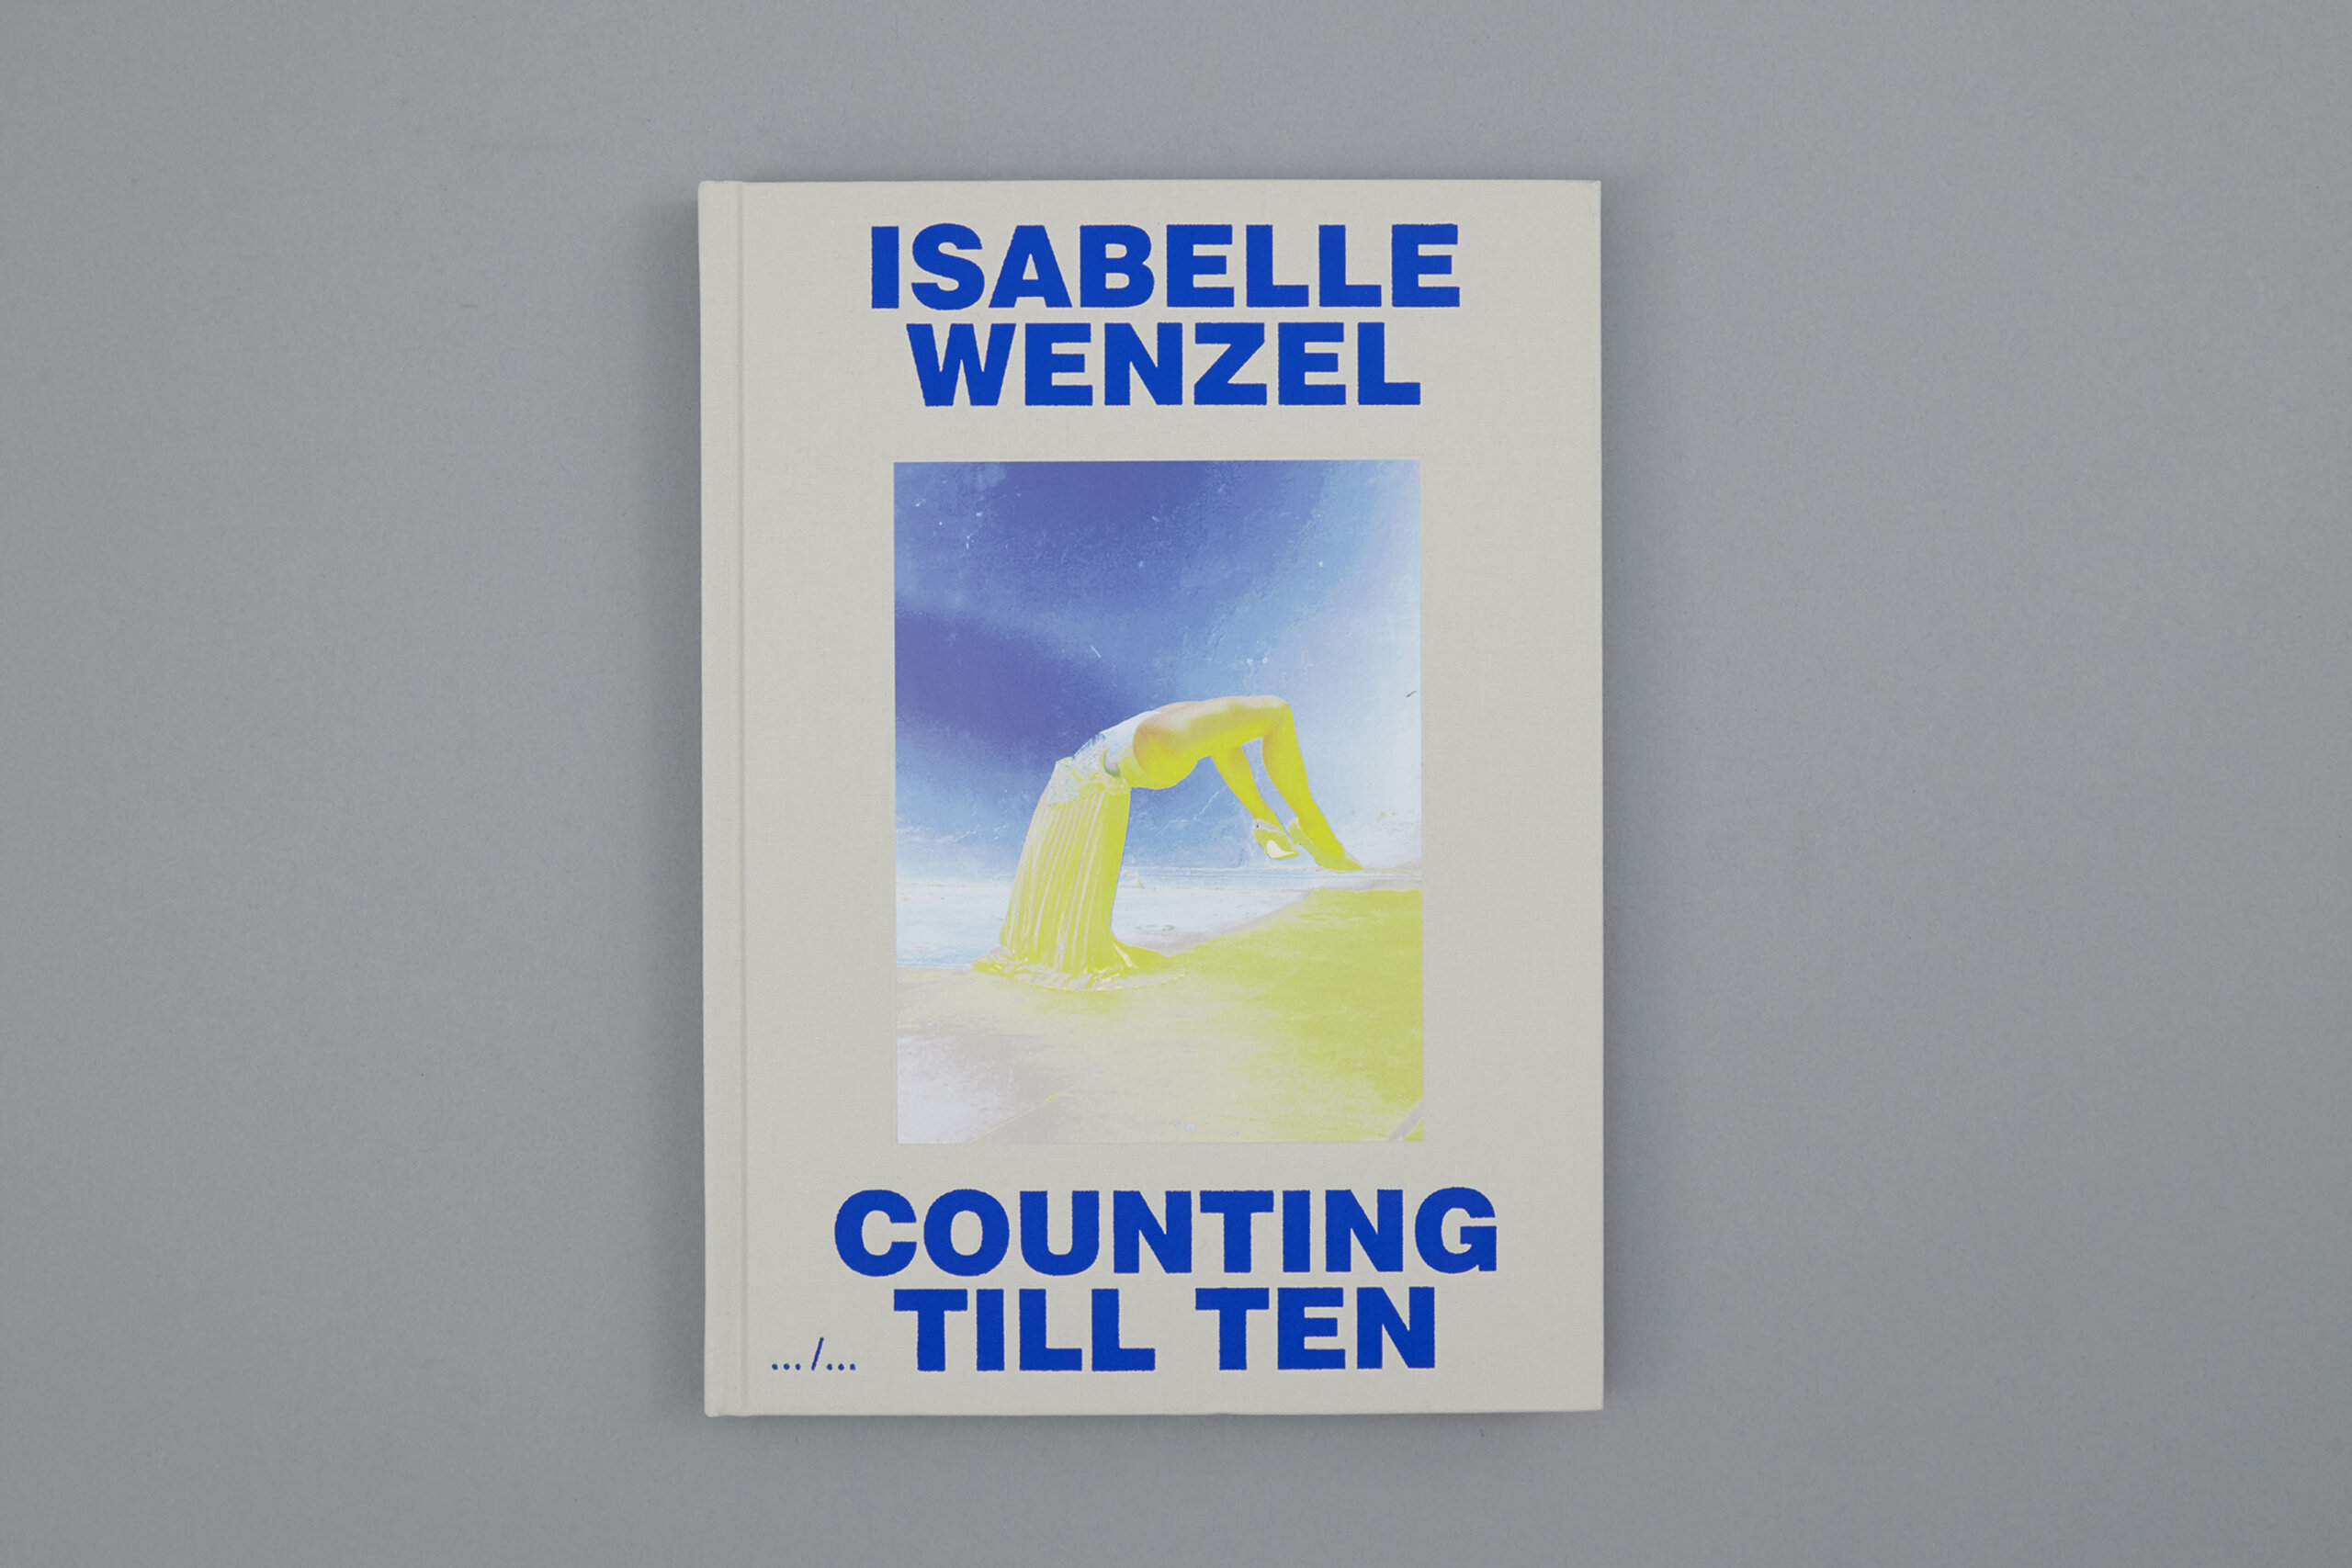 wenzel-counting-till-ten-delpire-co